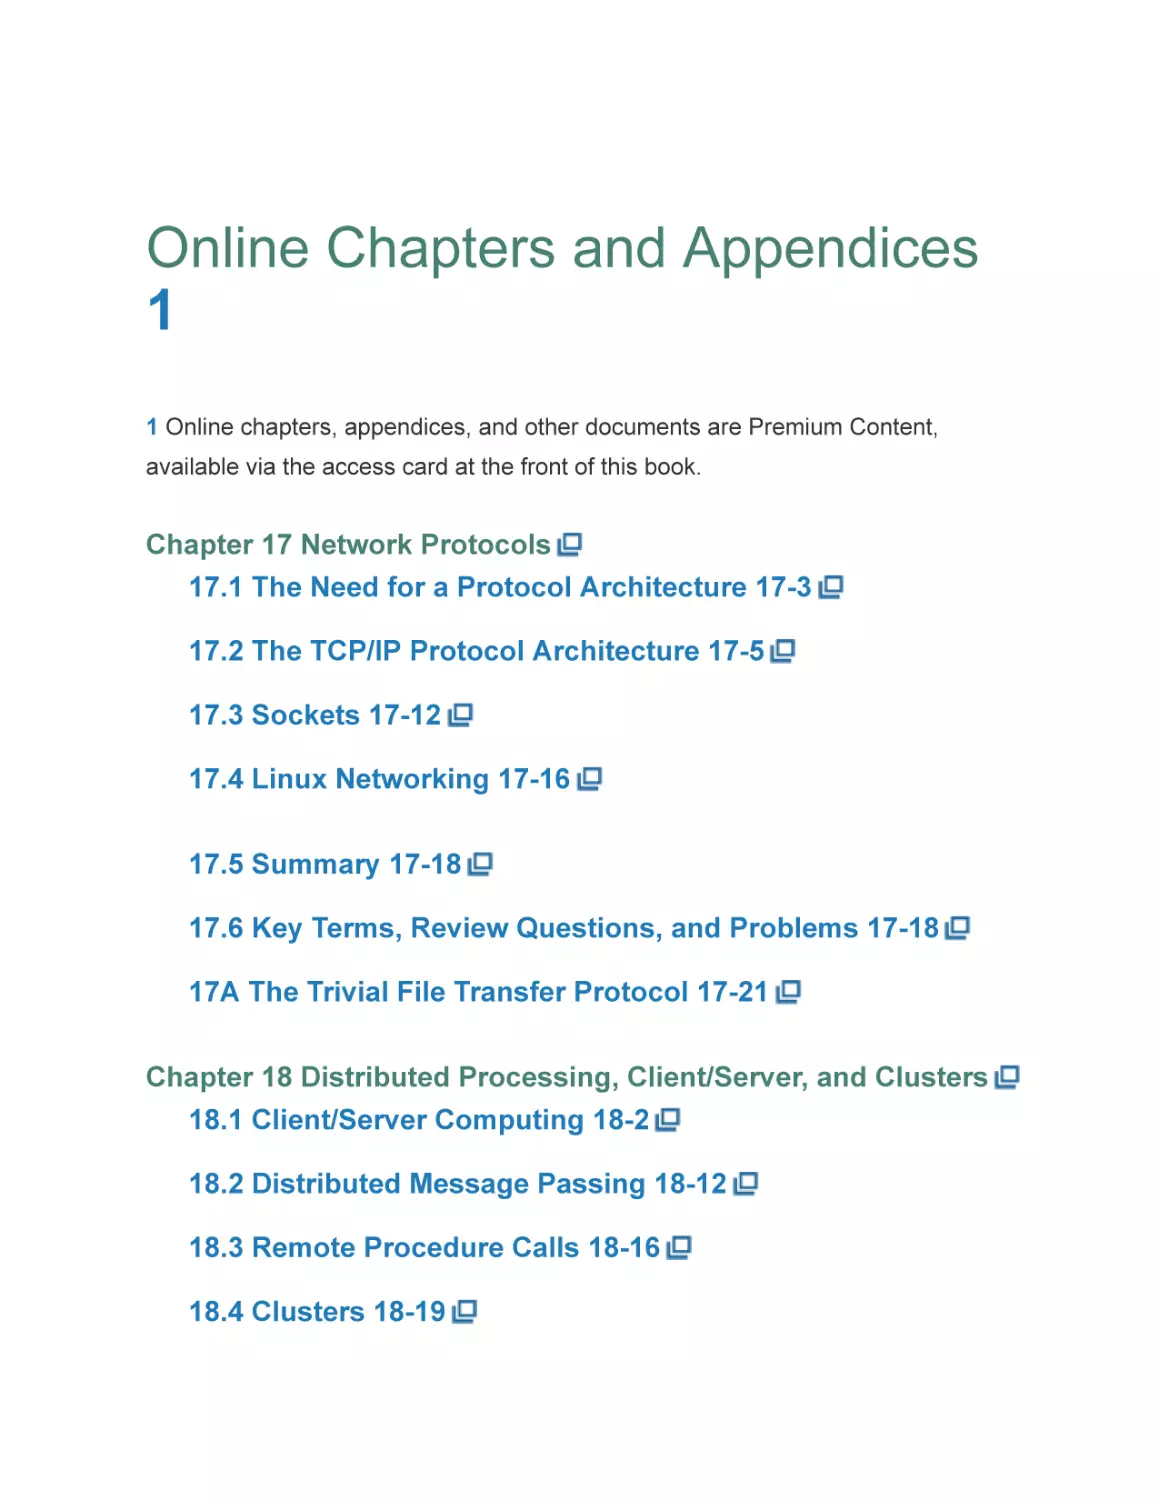 Online Chapters and Appendices 1